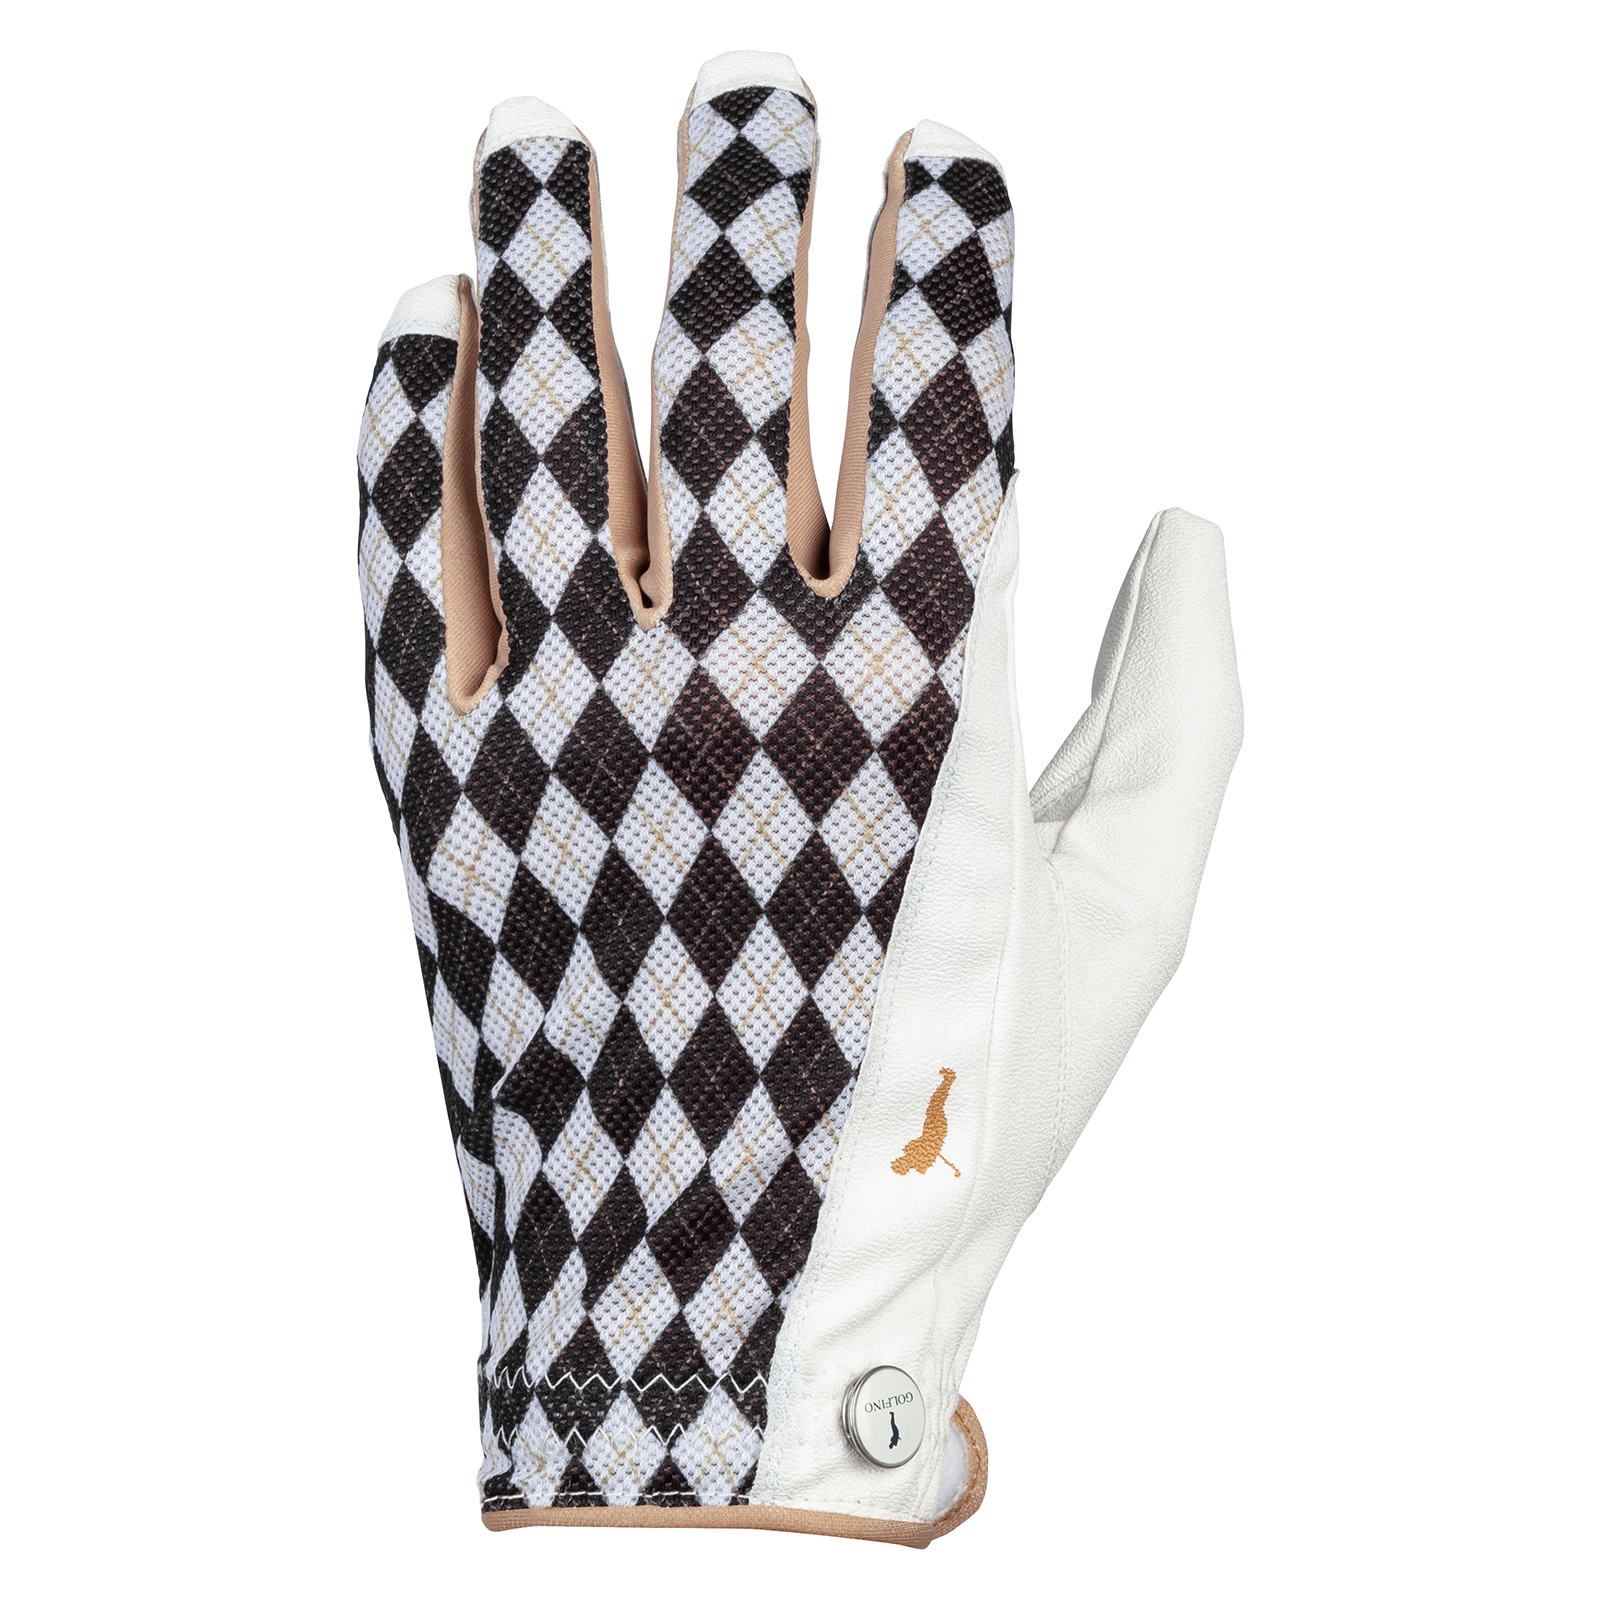 Ladies' left-hand golf glove made from vegan leather with argyle pattern 